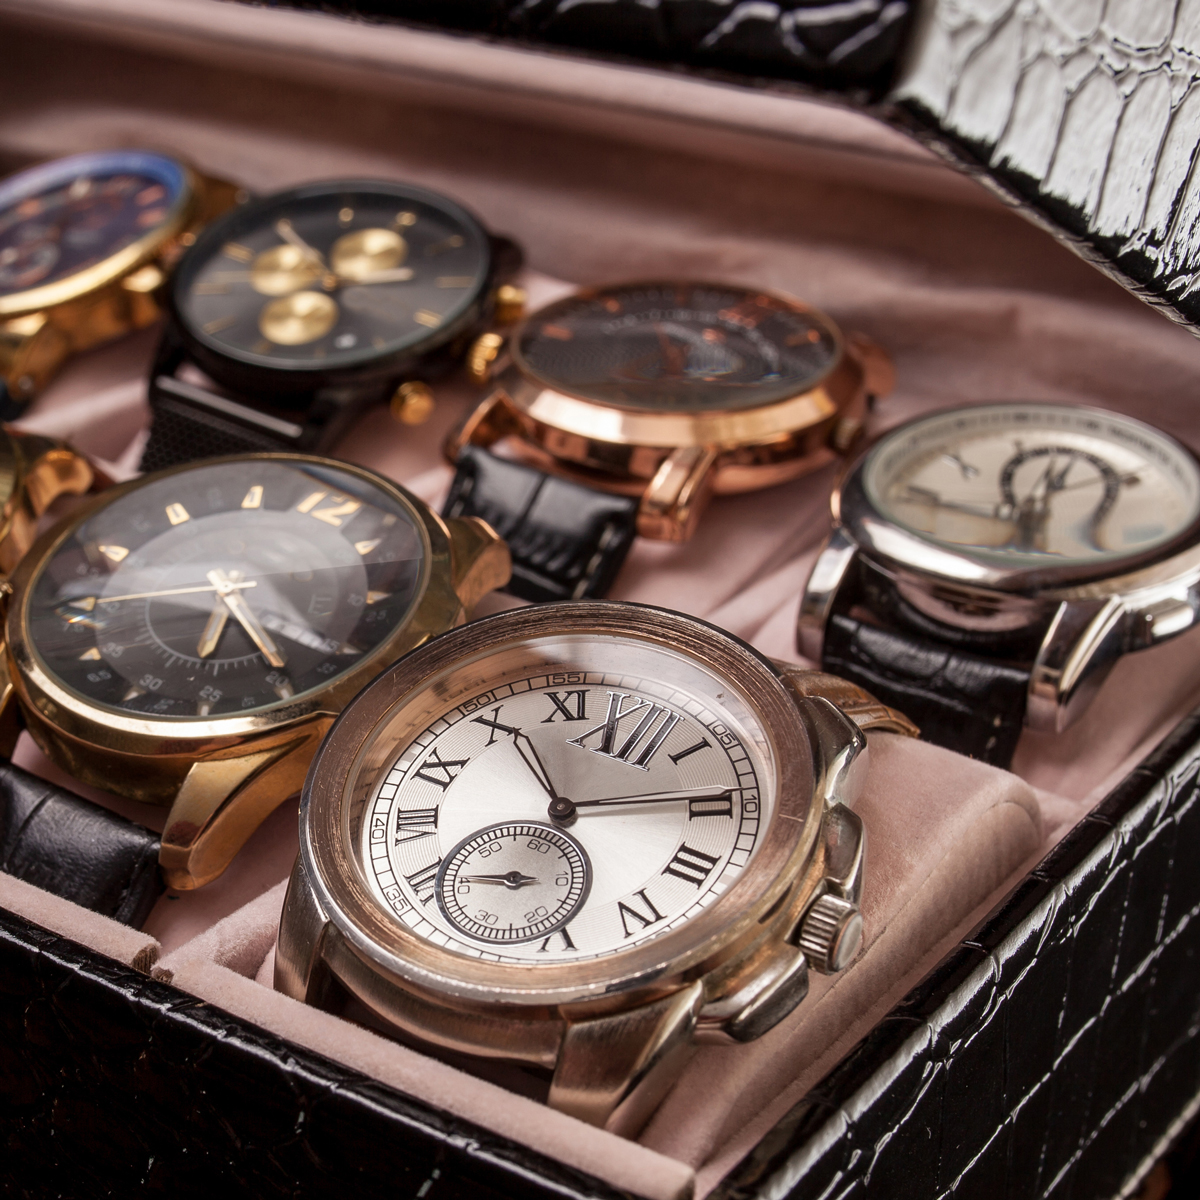 Watch Box of Luxury Watches